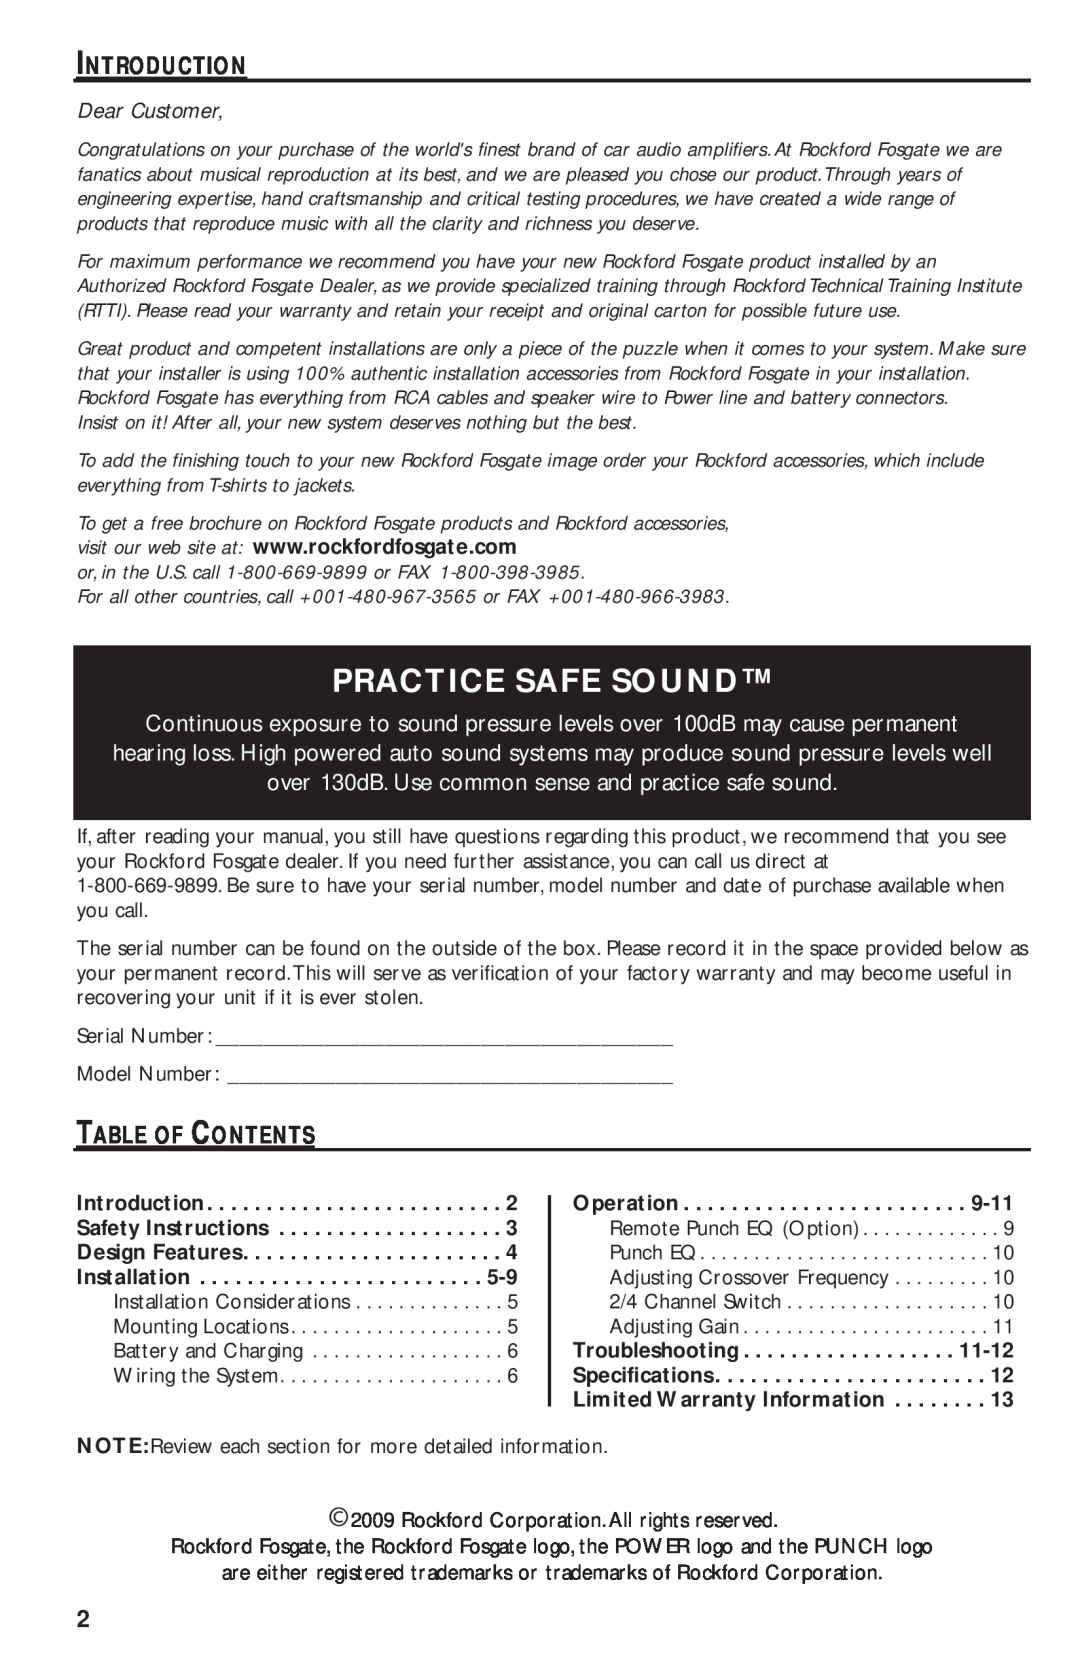 Rockford Fosgate T1000-4 manual Practice Safe Sound, Introduction, Dear Customer, Table Of Contents 